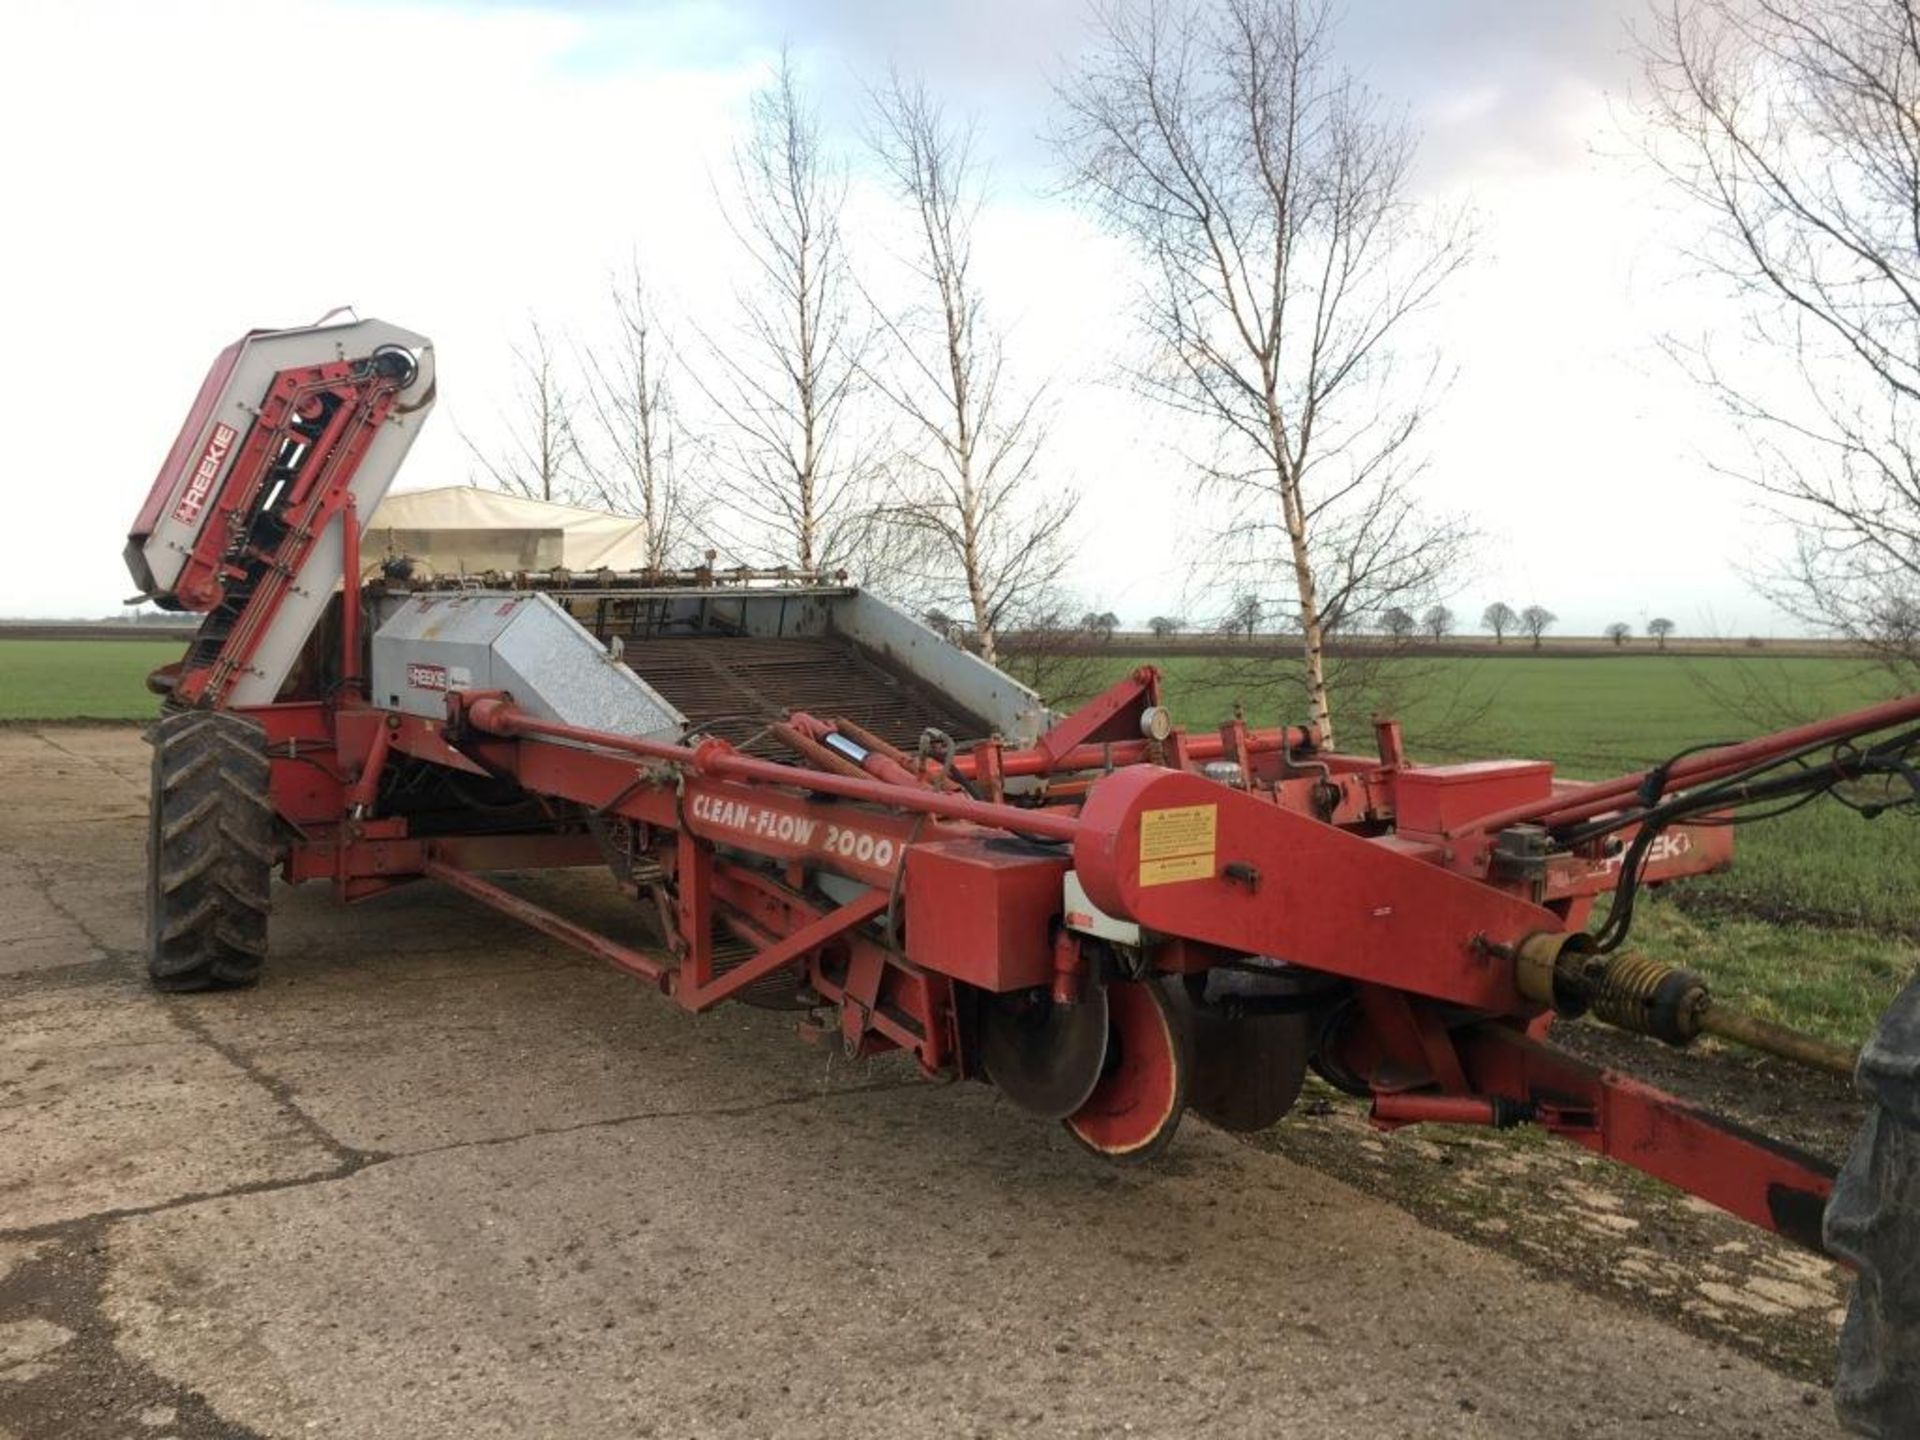 Reekie Clean Flow 2000 Potato Harvester Serial Number: 7030R Location: Thorney, Cambridgeshire - Image 2 of 4